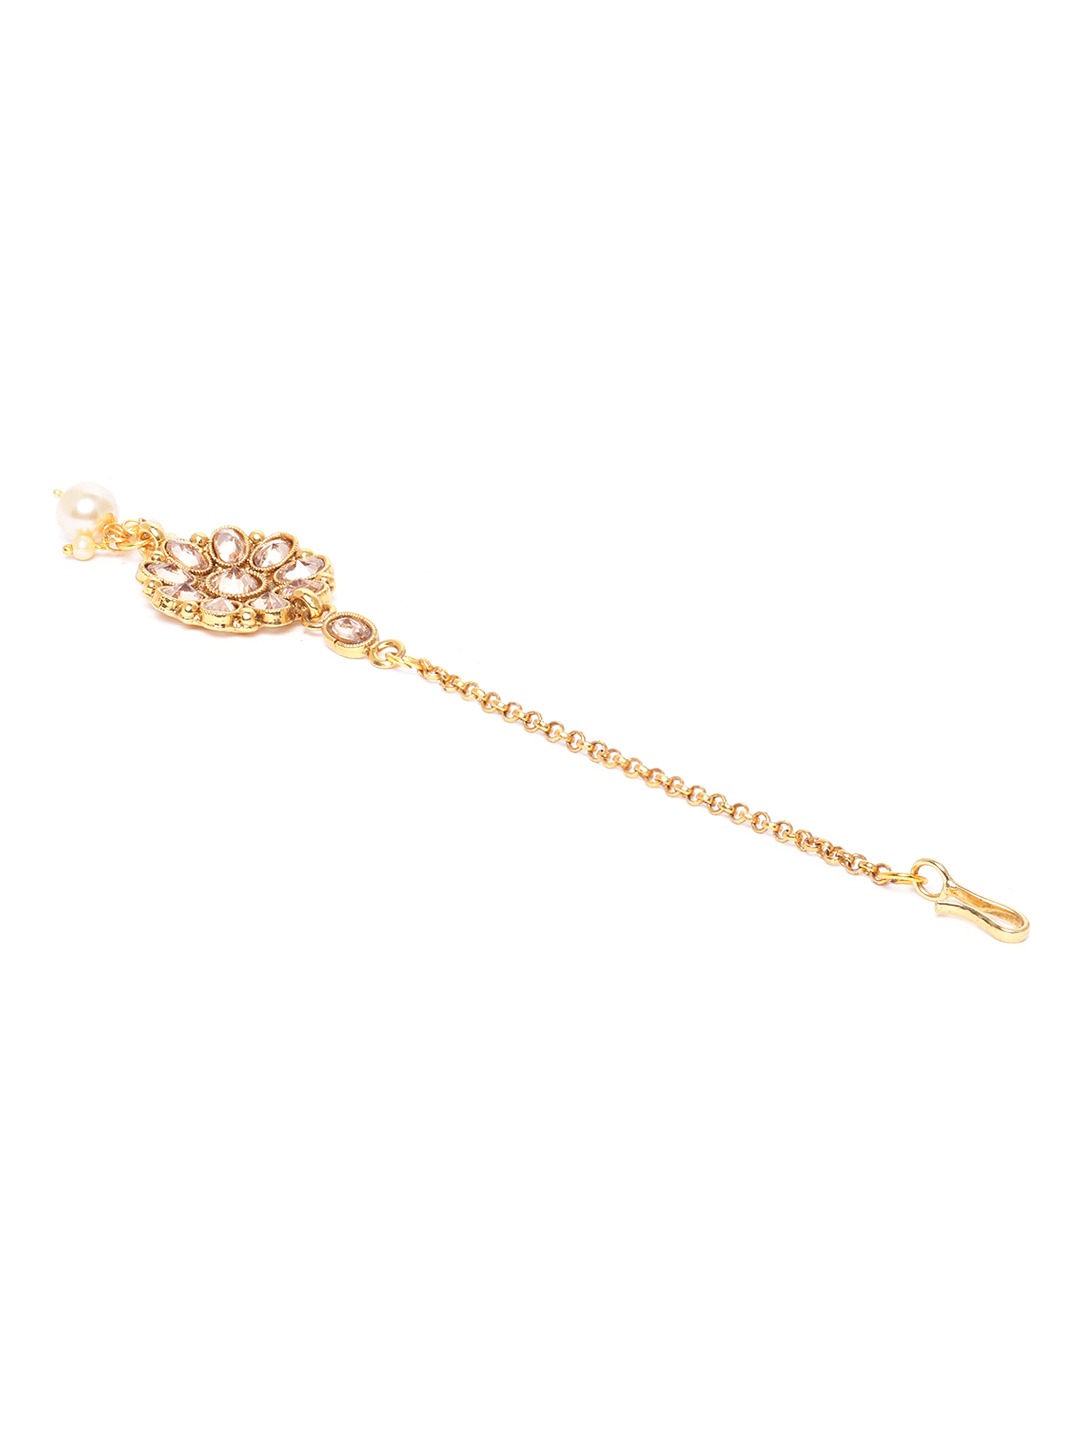 Off-White Gold-Plated Stone-Studded & Beaded Floral Shaped Maang Tikka